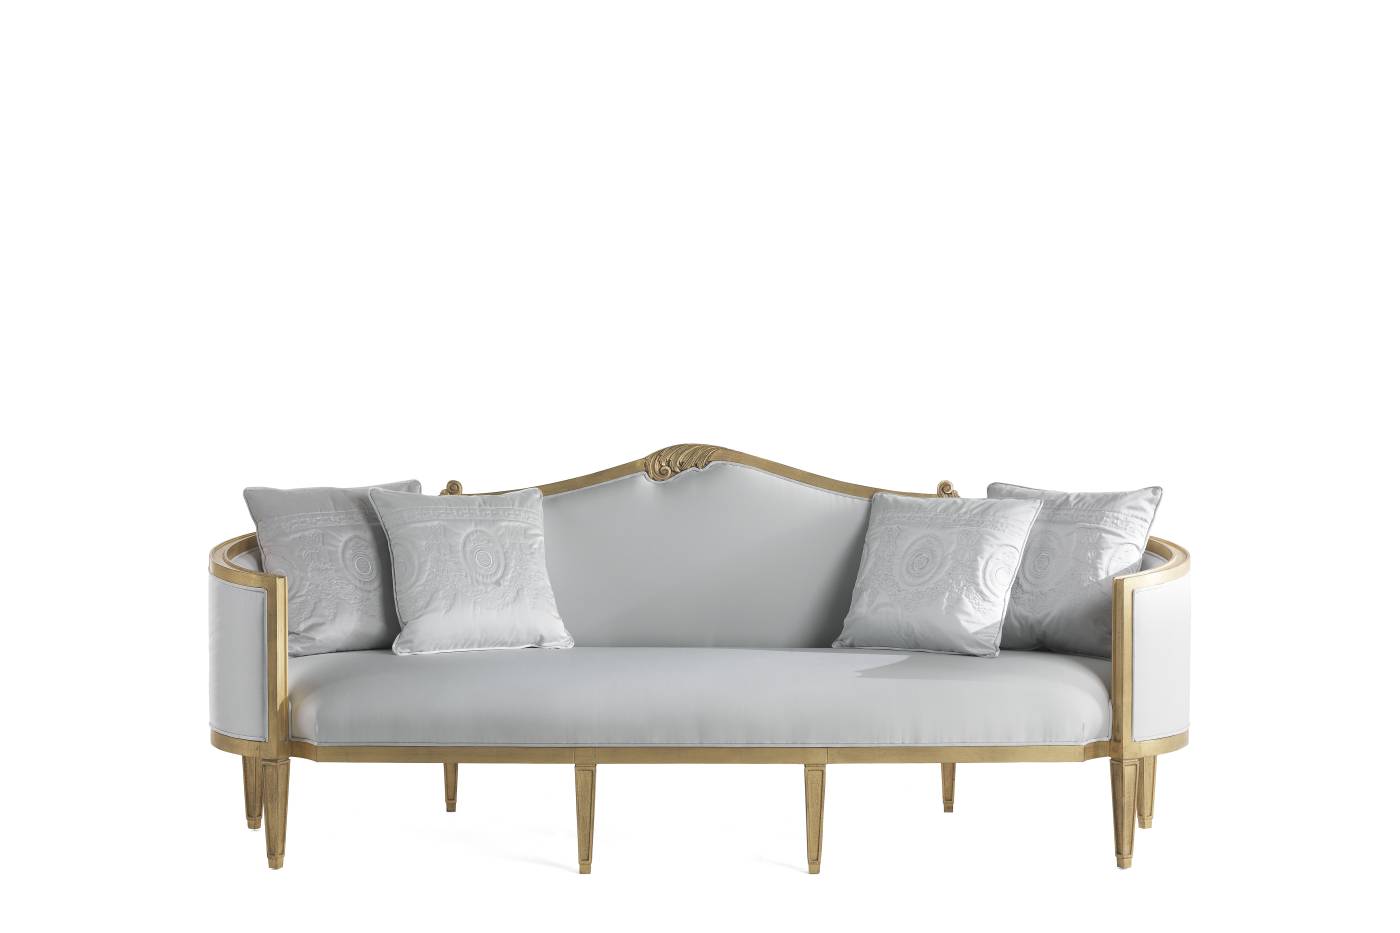 ANNECY loveseat - Quality furniture and timeless elegance with luxury Made in Italy classic sofas.